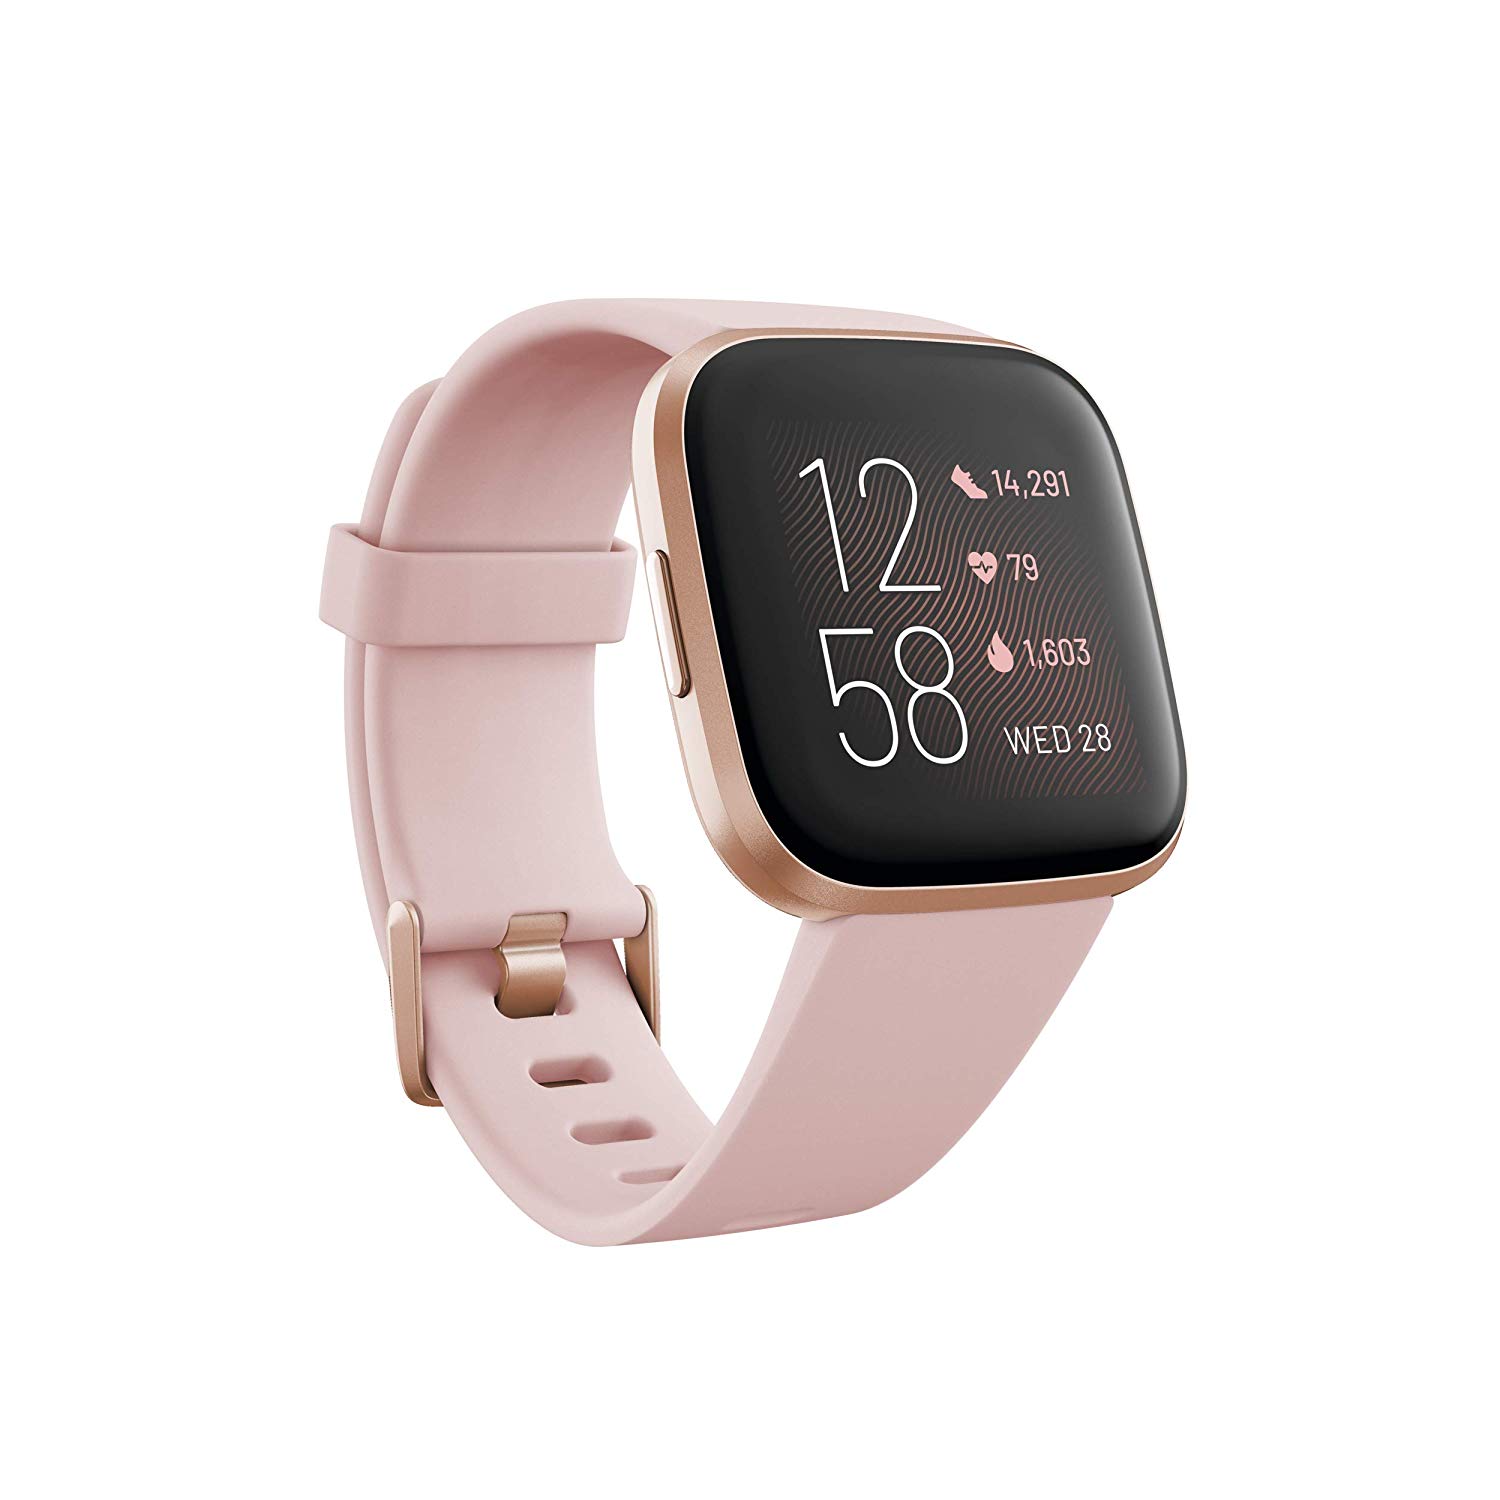 You are currently viewing Fitbit Versa 2 Review